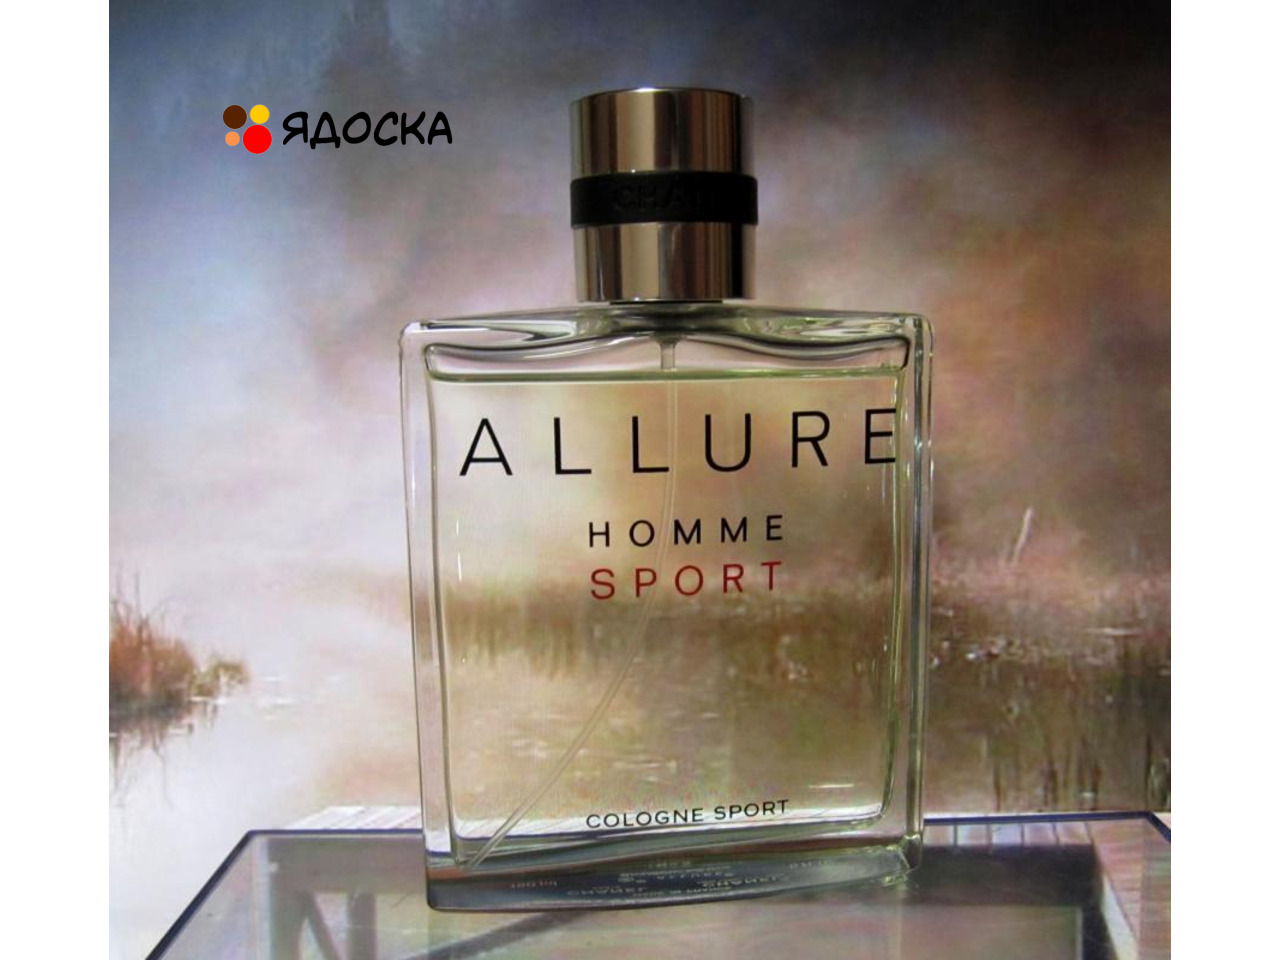 Allure sport cologne. Chanel Allure homme Sport Cologne. Chanel homme Sport Cologne. Chanel Allure Sport Cologne EDC. Chanel Allure homme Cologne 100 ml.